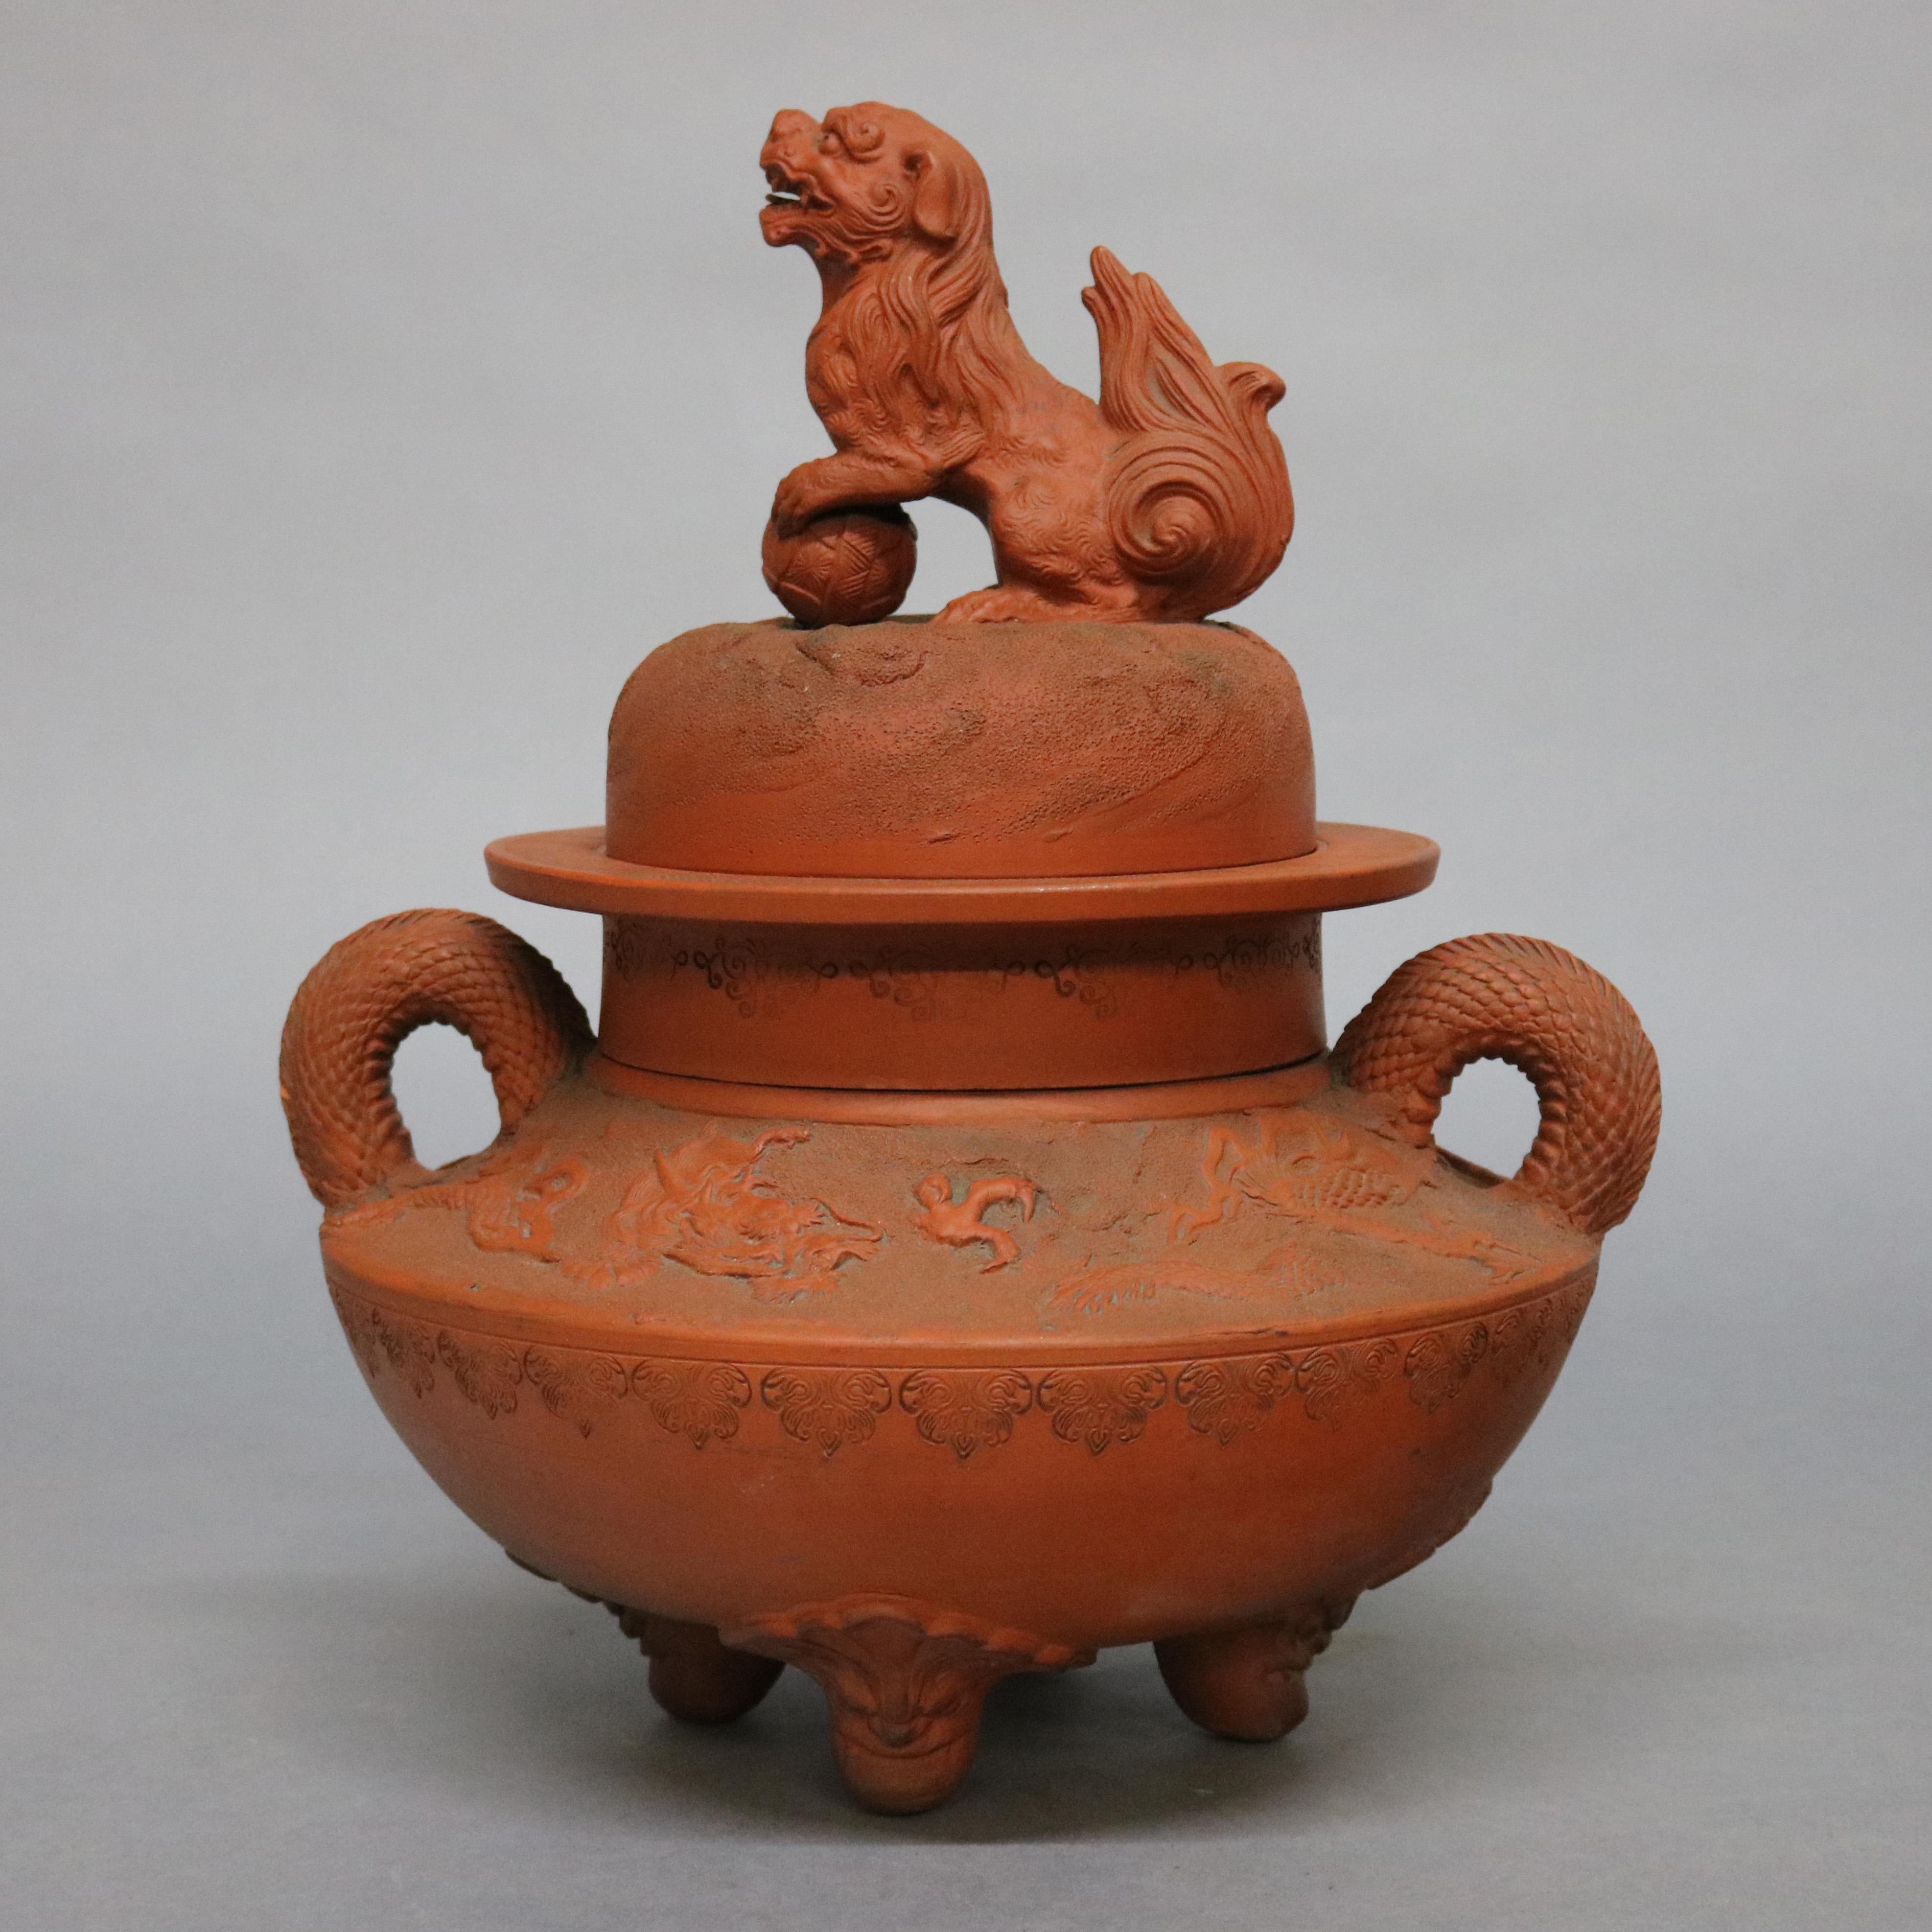 An antique and large Japanese censer offers urn form with foo dog finial on lid surmounting urn with removable basket weave collar, double serpent handles and having dragon relief design, stamped on base as photographed, circa 1900

Measures: 15